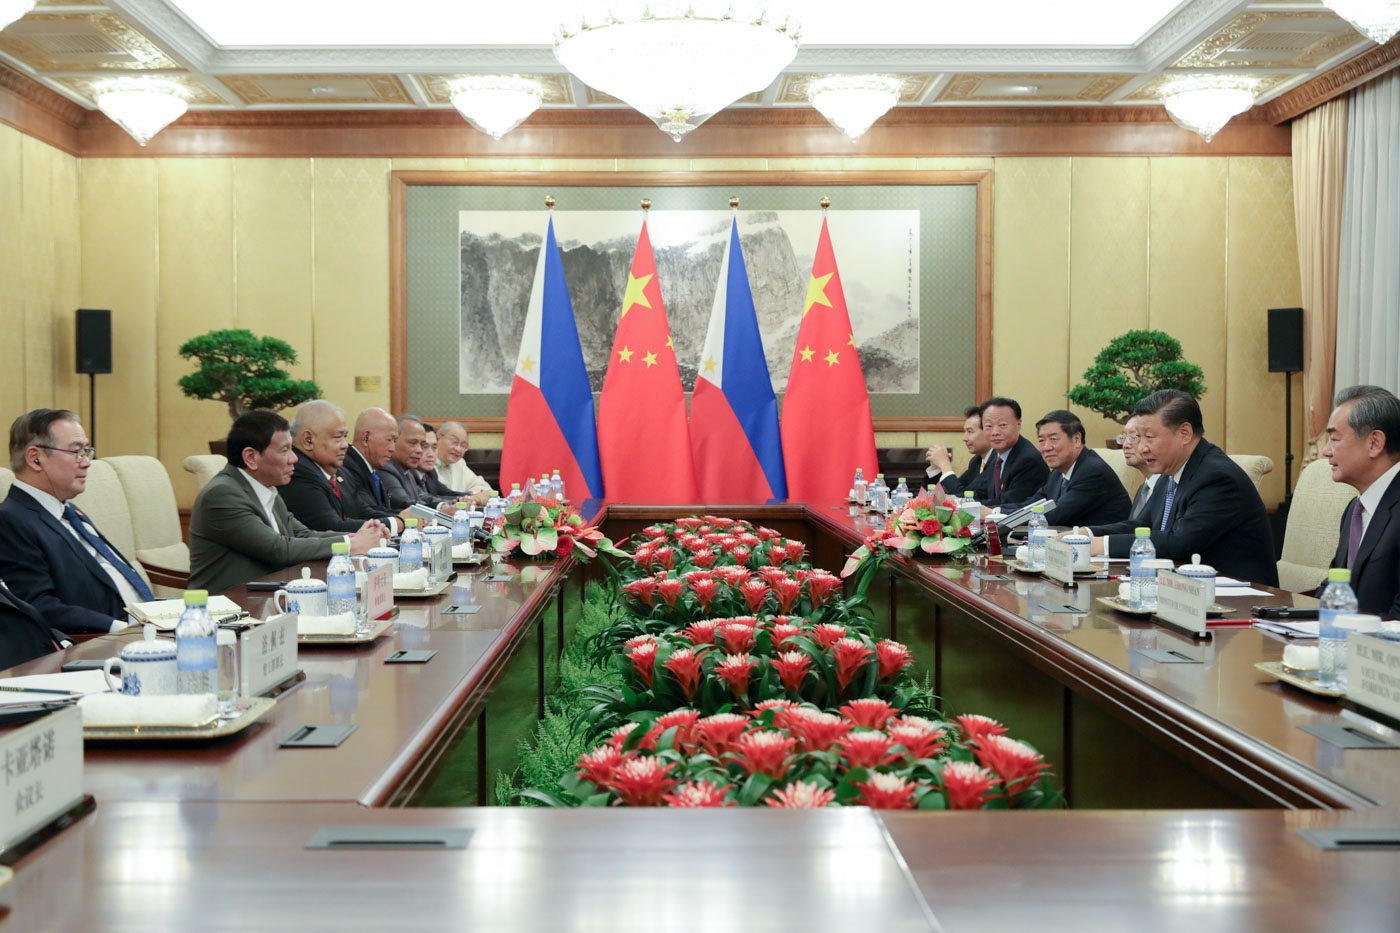 COOPERATION ON OIL, GAS. President Rodrigo Duterte and People's Republic of China President Xi Jinping discuss matters during the bilateral meeting at the Diaoyutai State Guesthouse in Beijing on August 29, 2019. Malacañang photo 